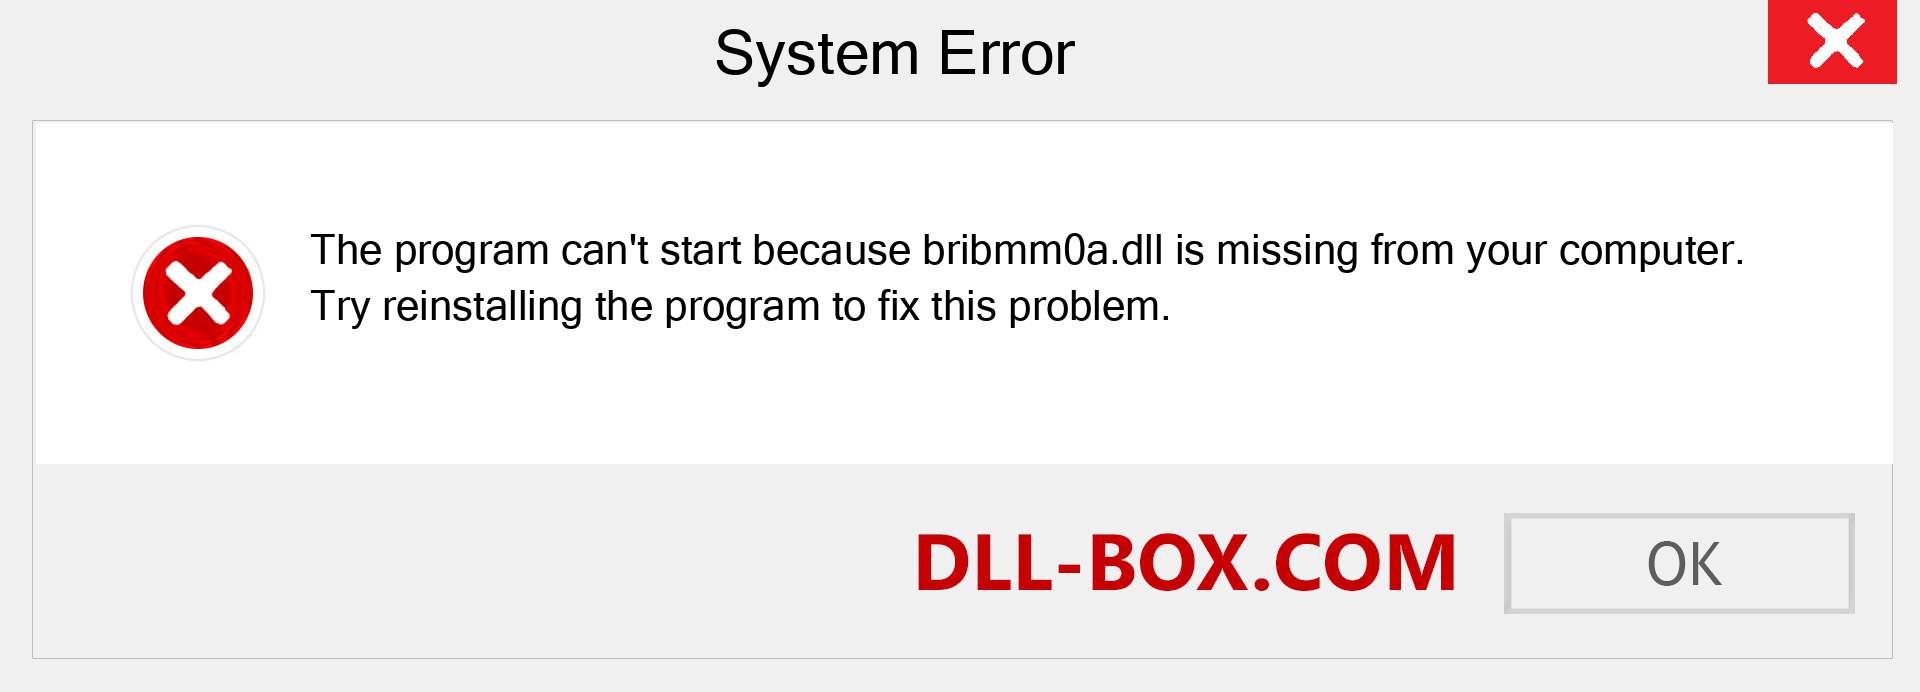  bribmm0a.dll file is missing?. Download for Windows 7, 8, 10 - Fix  bribmm0a dll Missing Error on Windows, photos, images